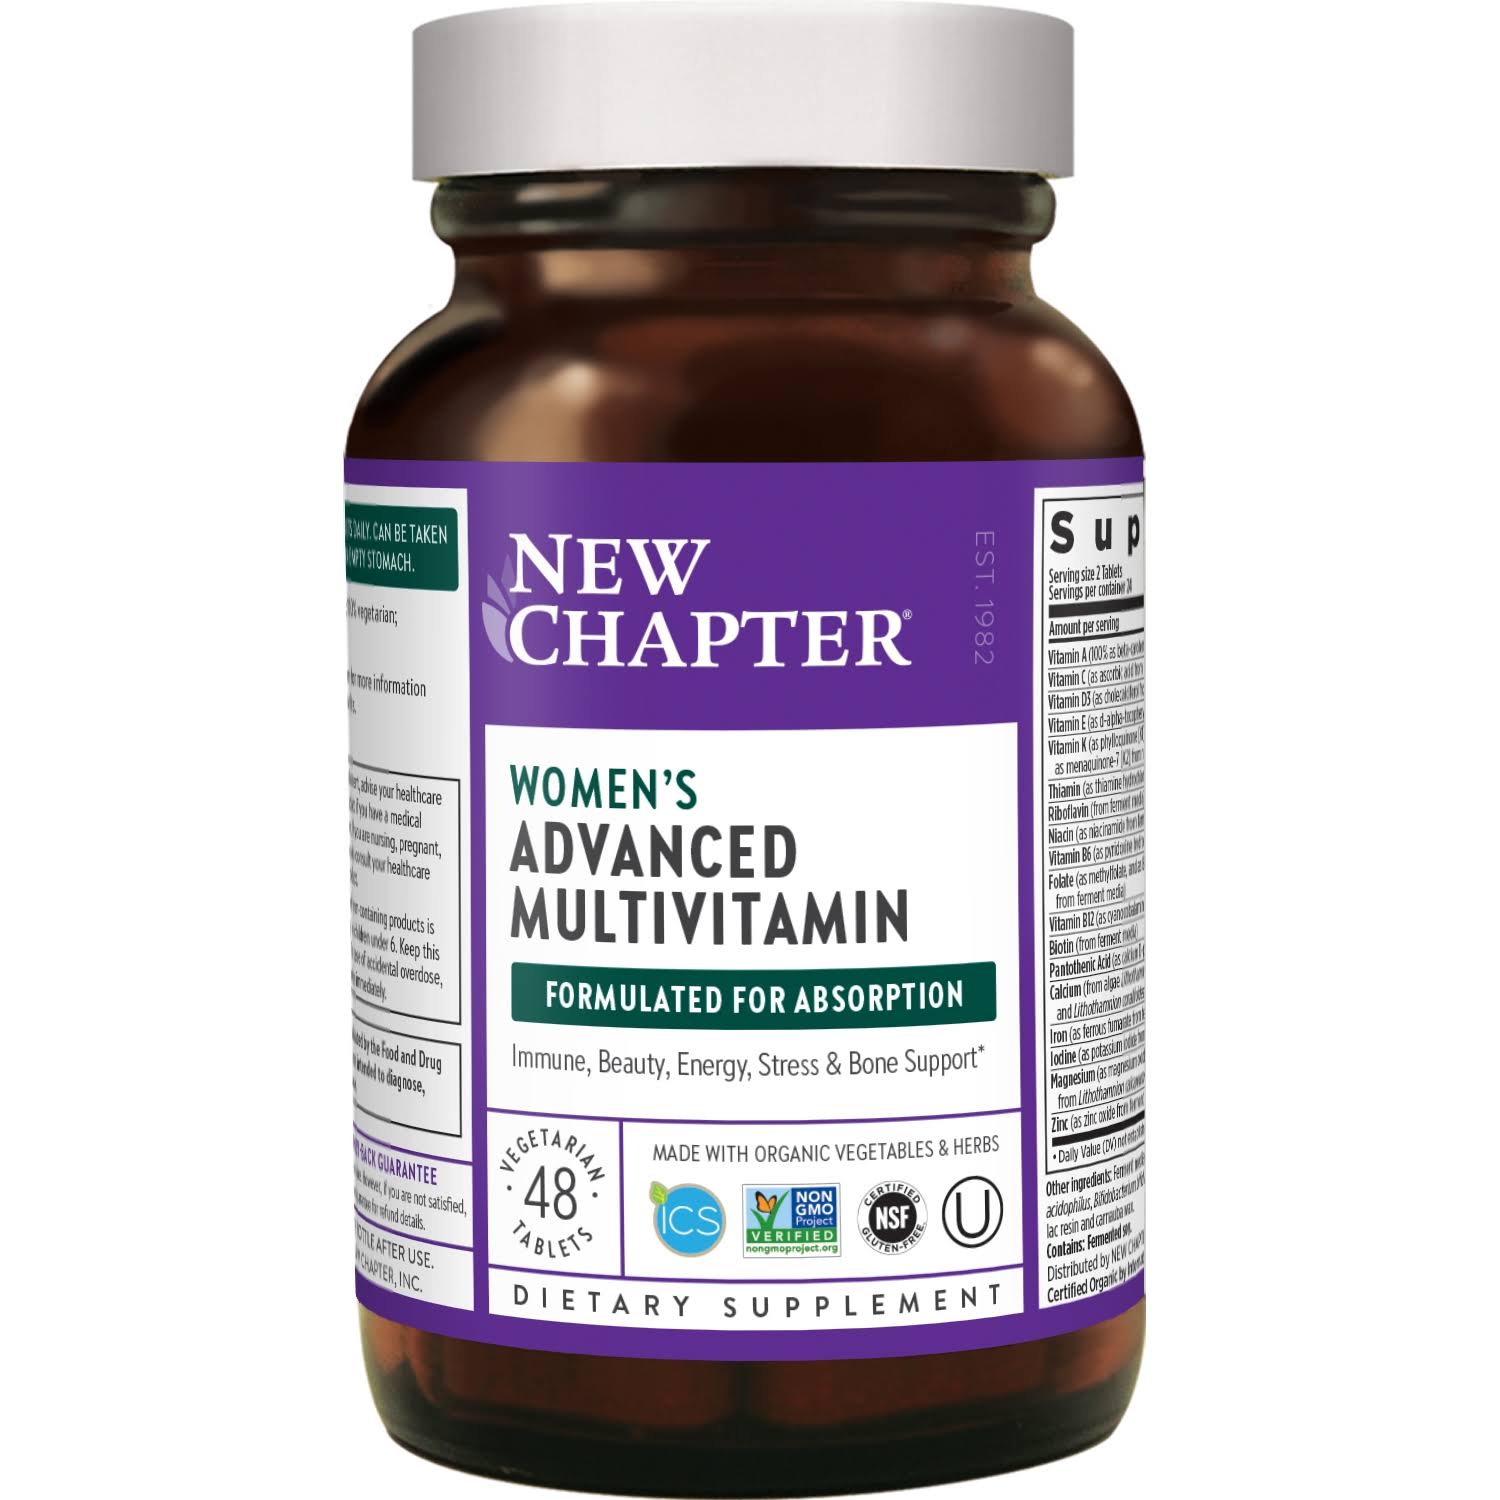 New Chapter Every Woman's One Daily Multivitamin Supplement - 48 Count]